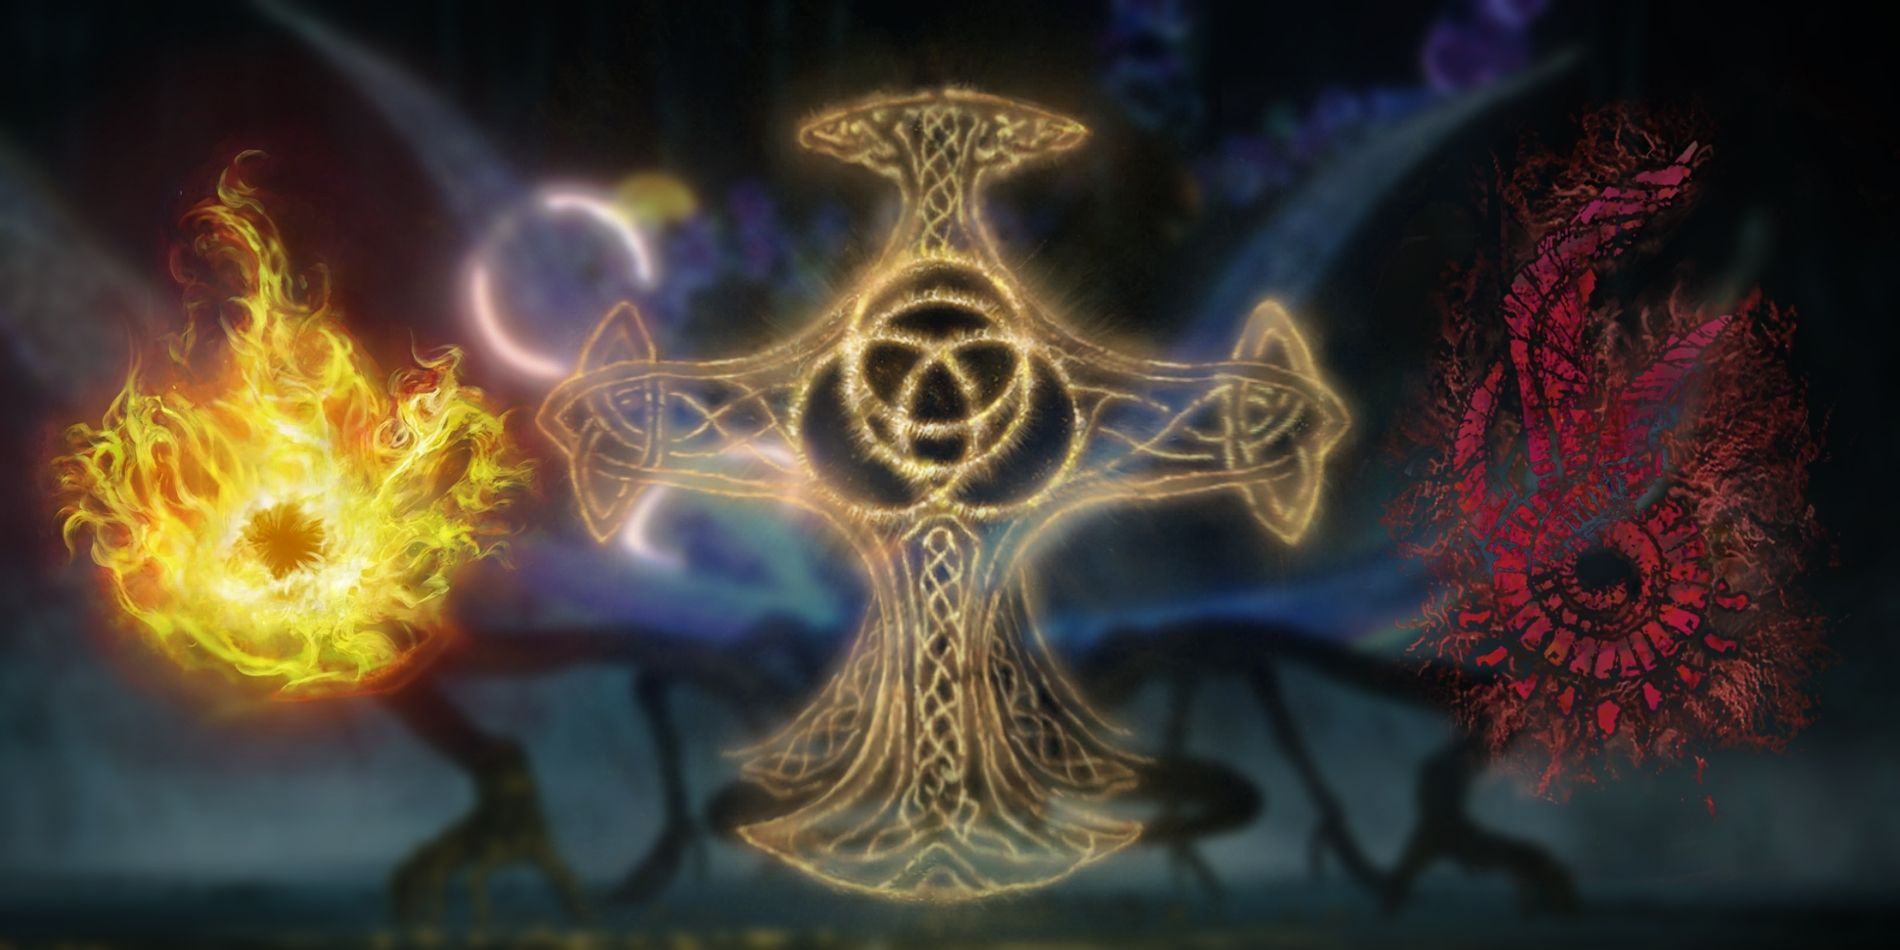 Elden Ring's Frenzied Flame Seal to the left, the Erdtree Seal in the middle, and the Dragon Communion Seal to the right. Blurred-out in the background is an in-game screenshot of the Astel boss.